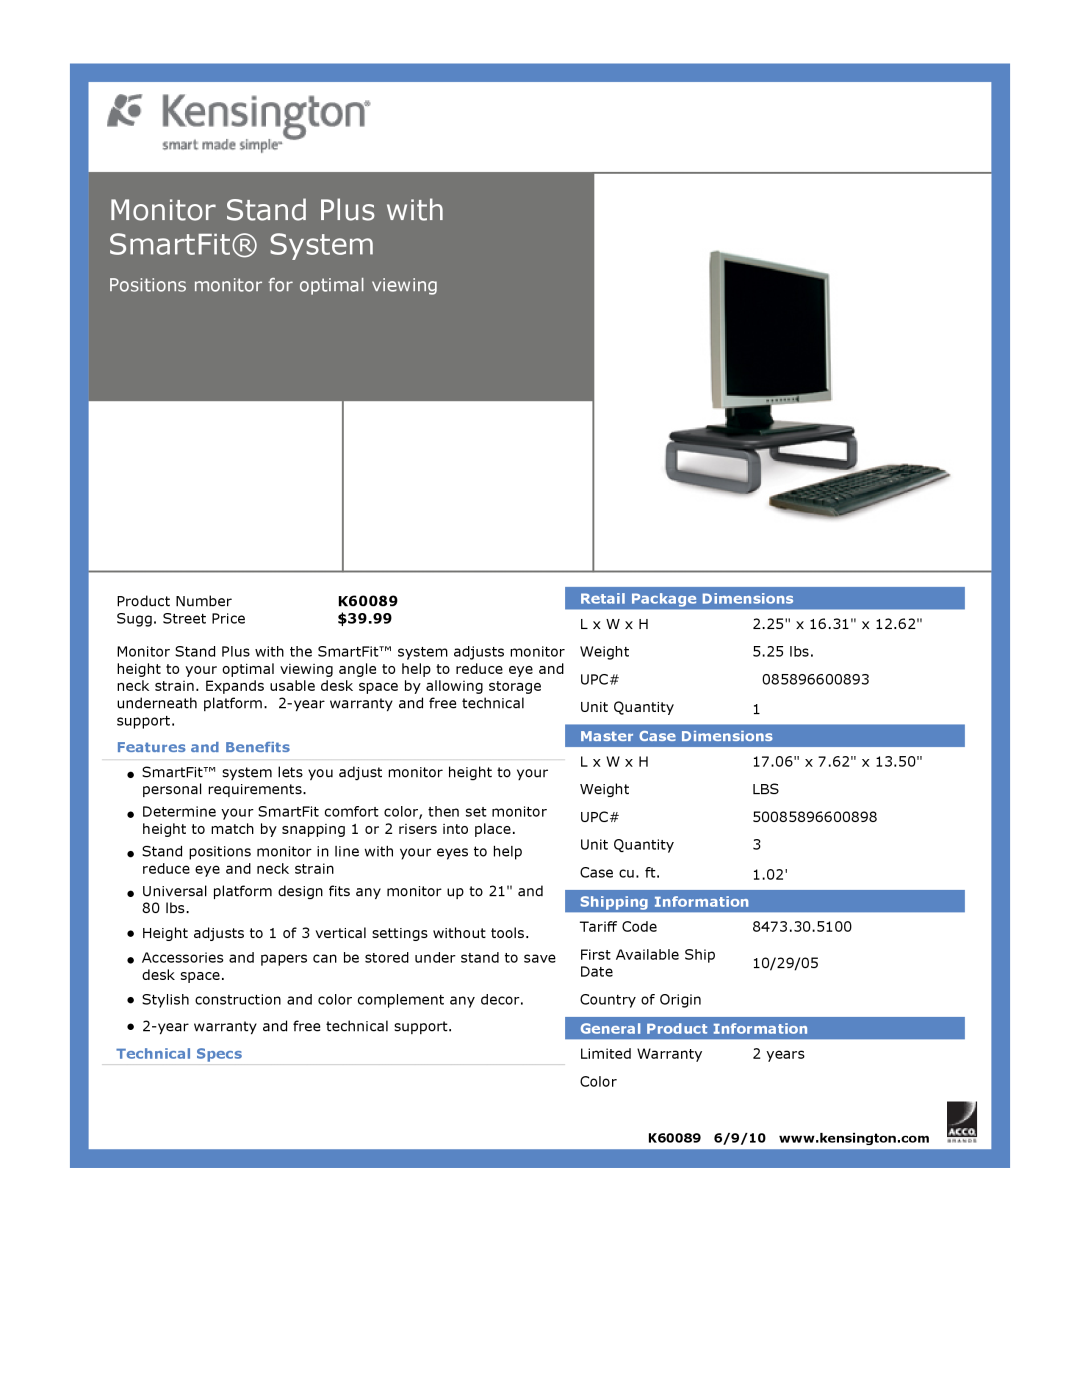 Kensington EU64325 Monitor Stand Plus with SmartFit System, Positions monitor for optimal viewing, $39.99, Technical Specs 